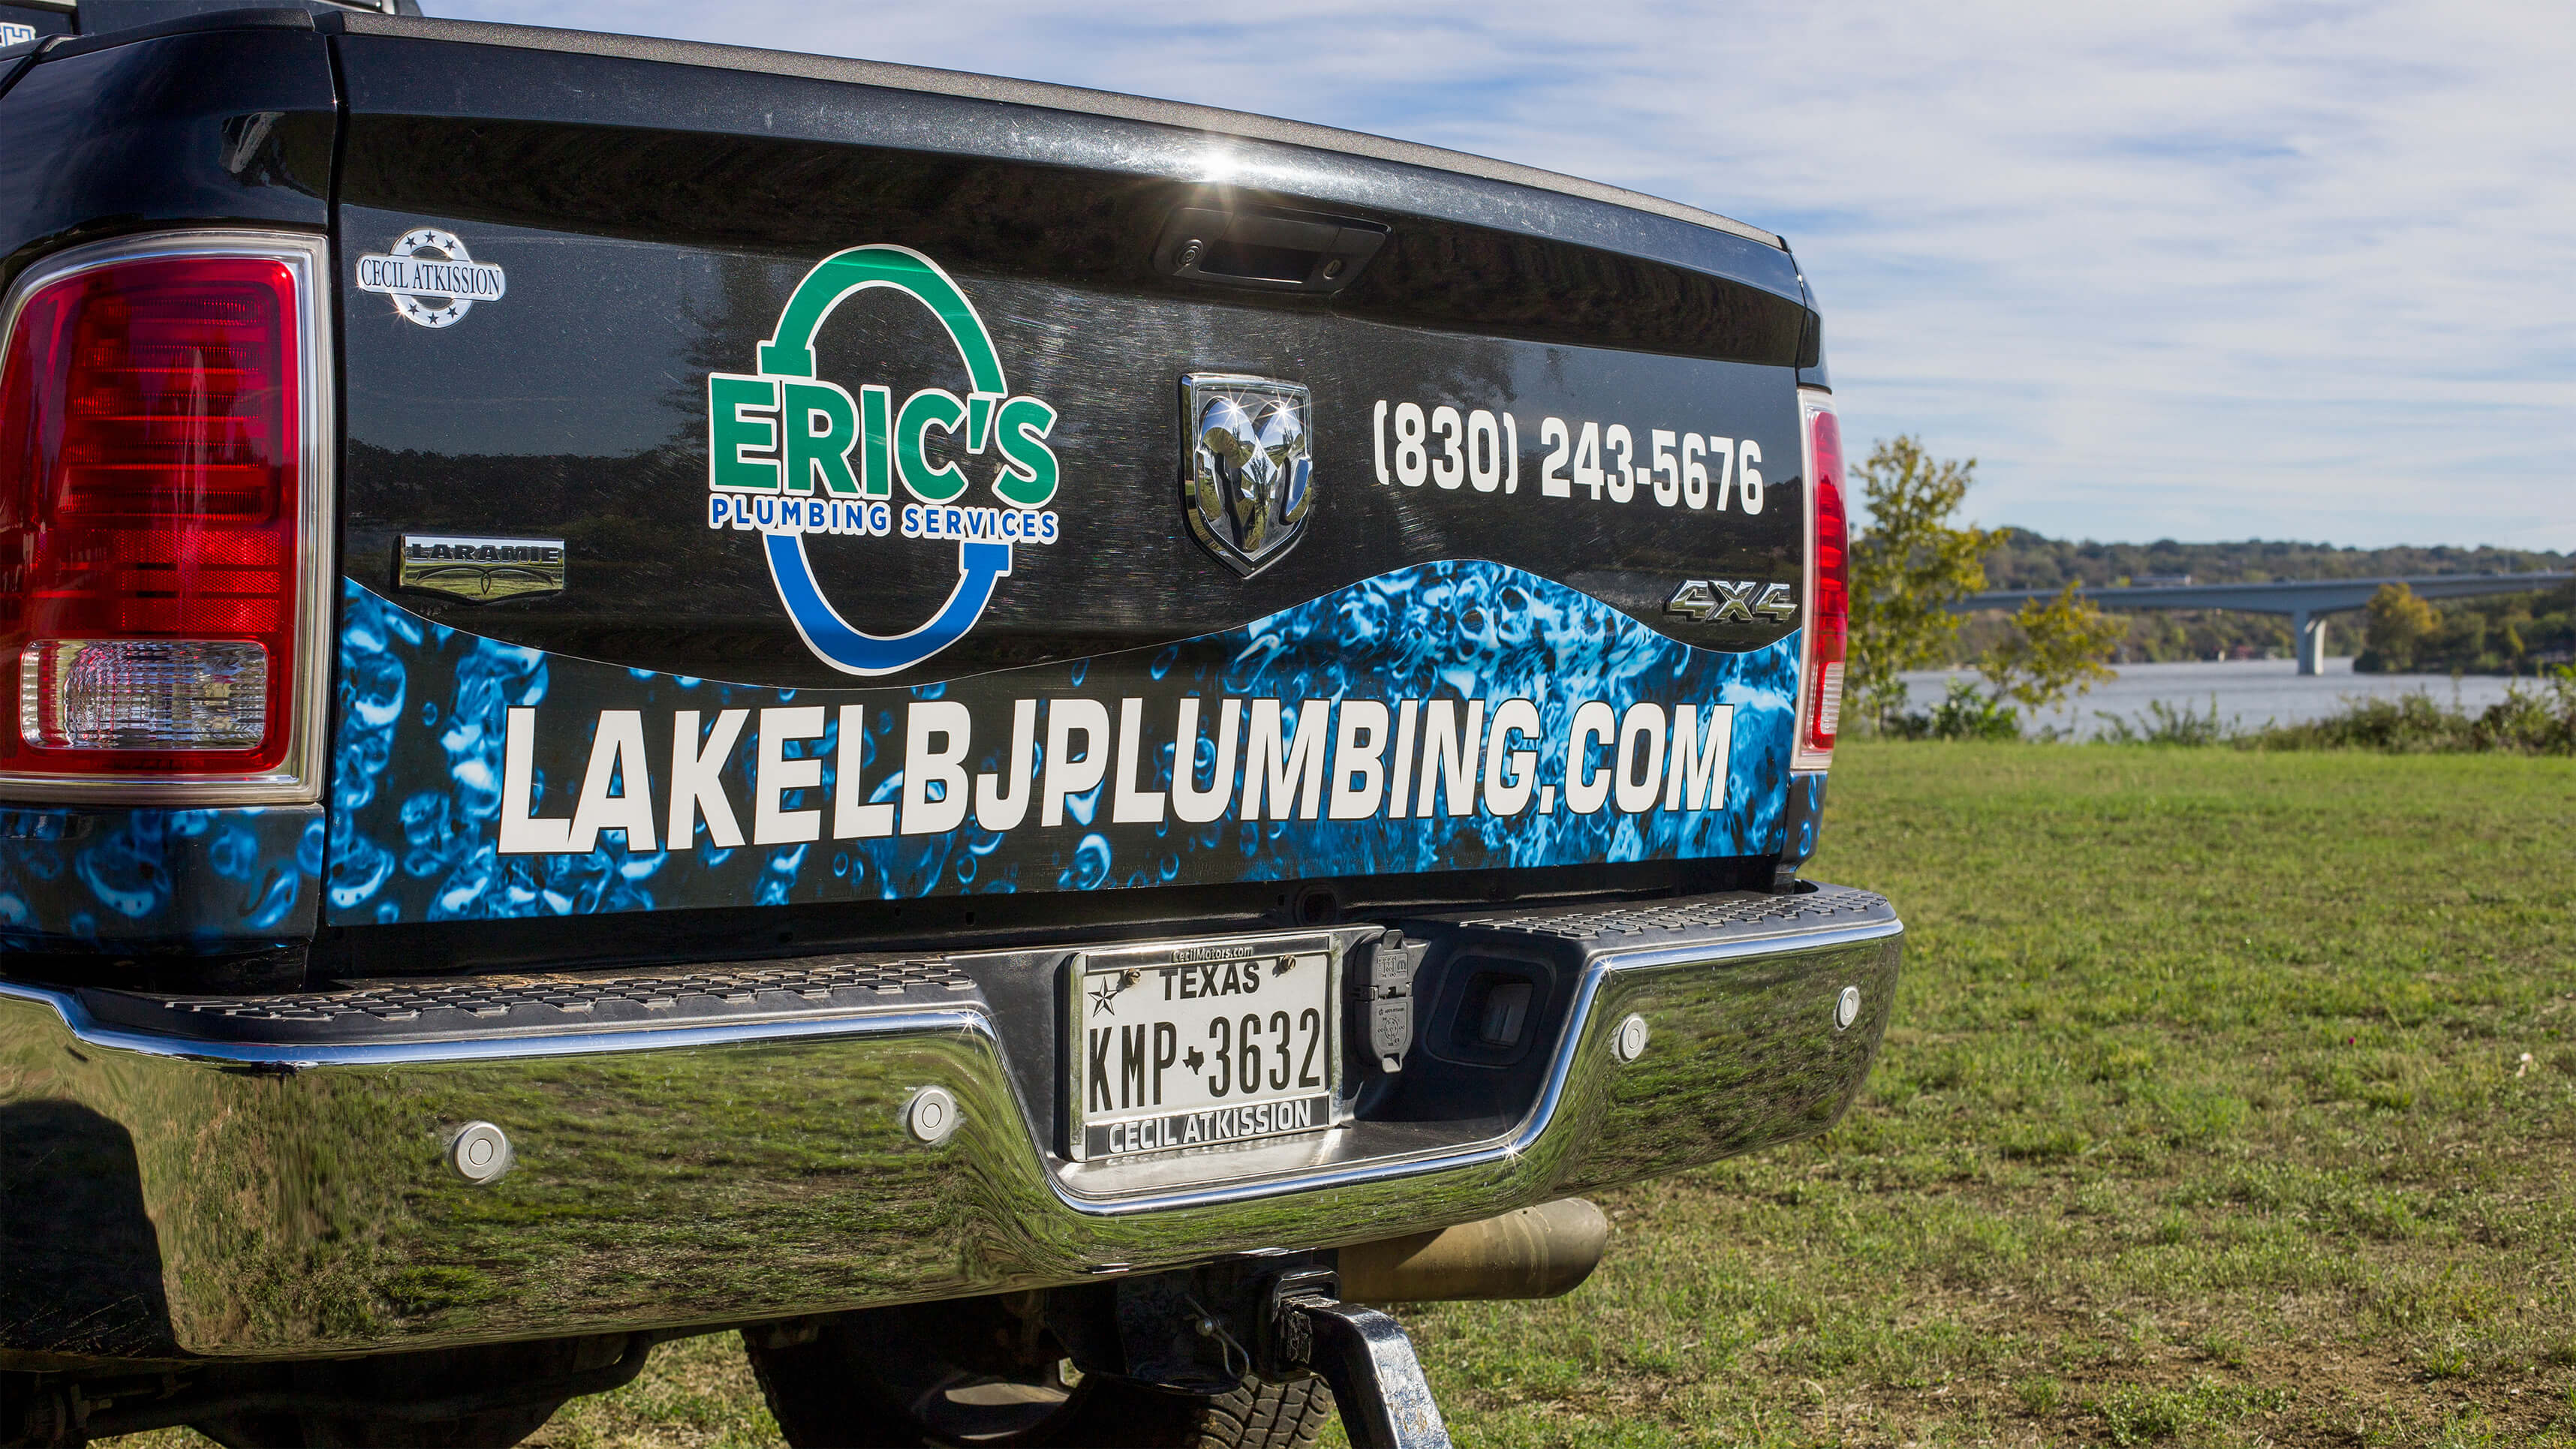 Eric's Plumbing Services - Central Texas Best Plumber